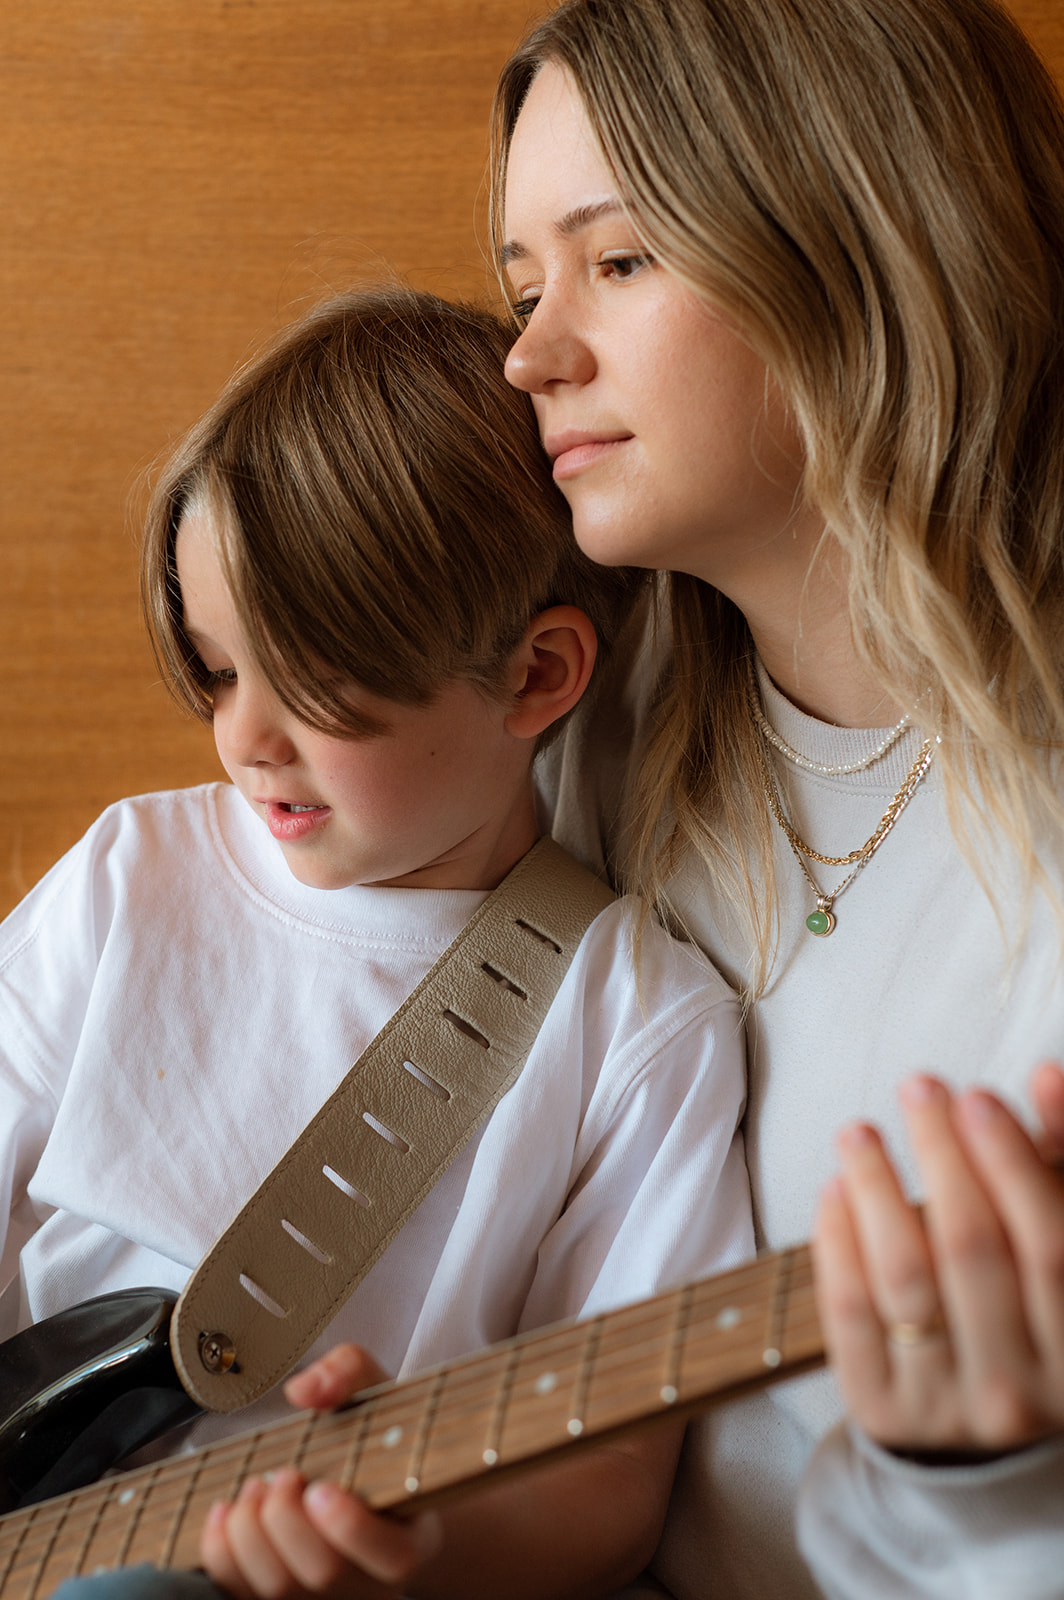 Mom and son play guitar together